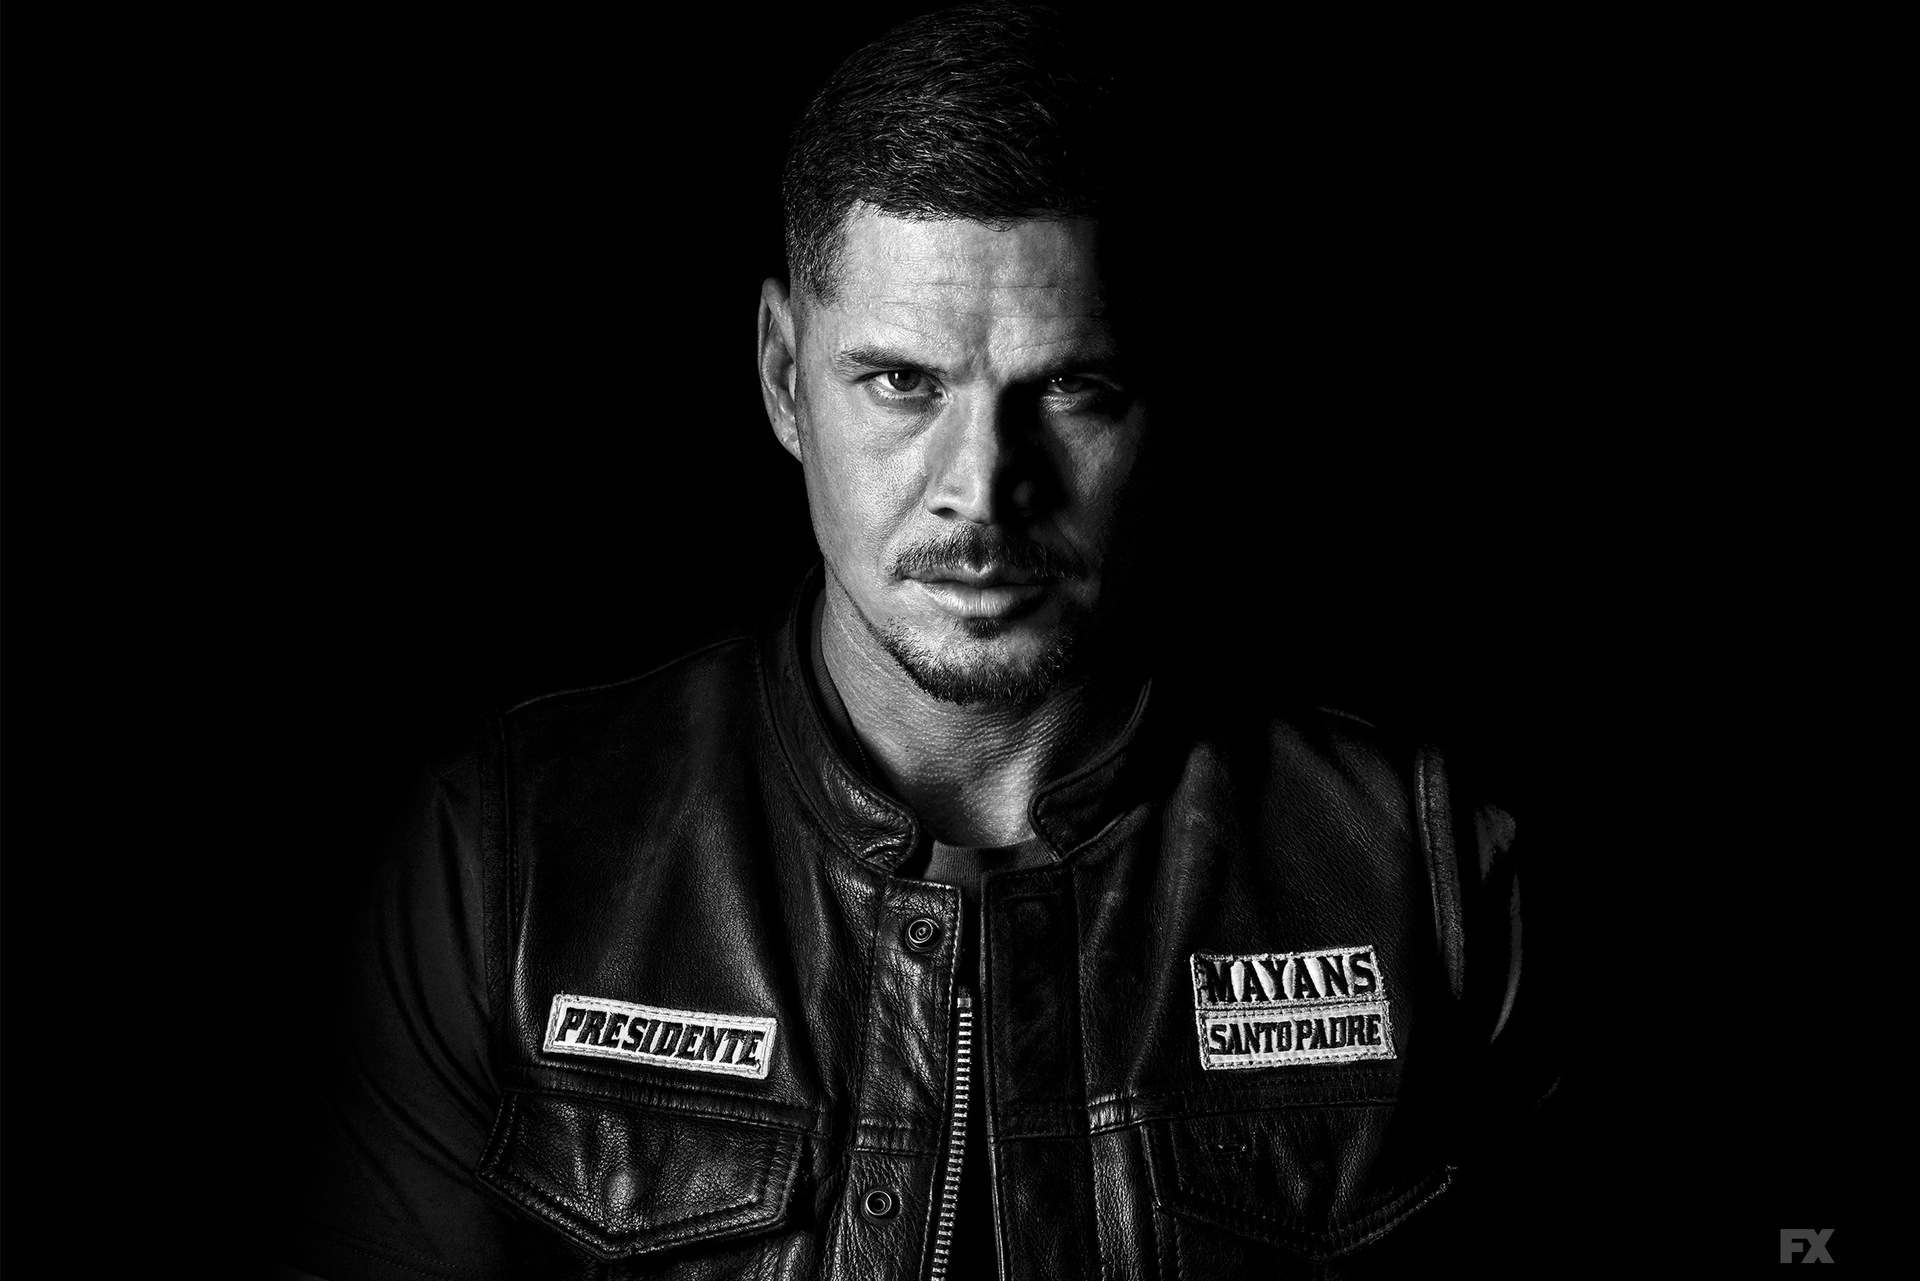 JD Pardo wearing a leather jacket with two badges that read "Presidente" and "Mayans Santo Padre"